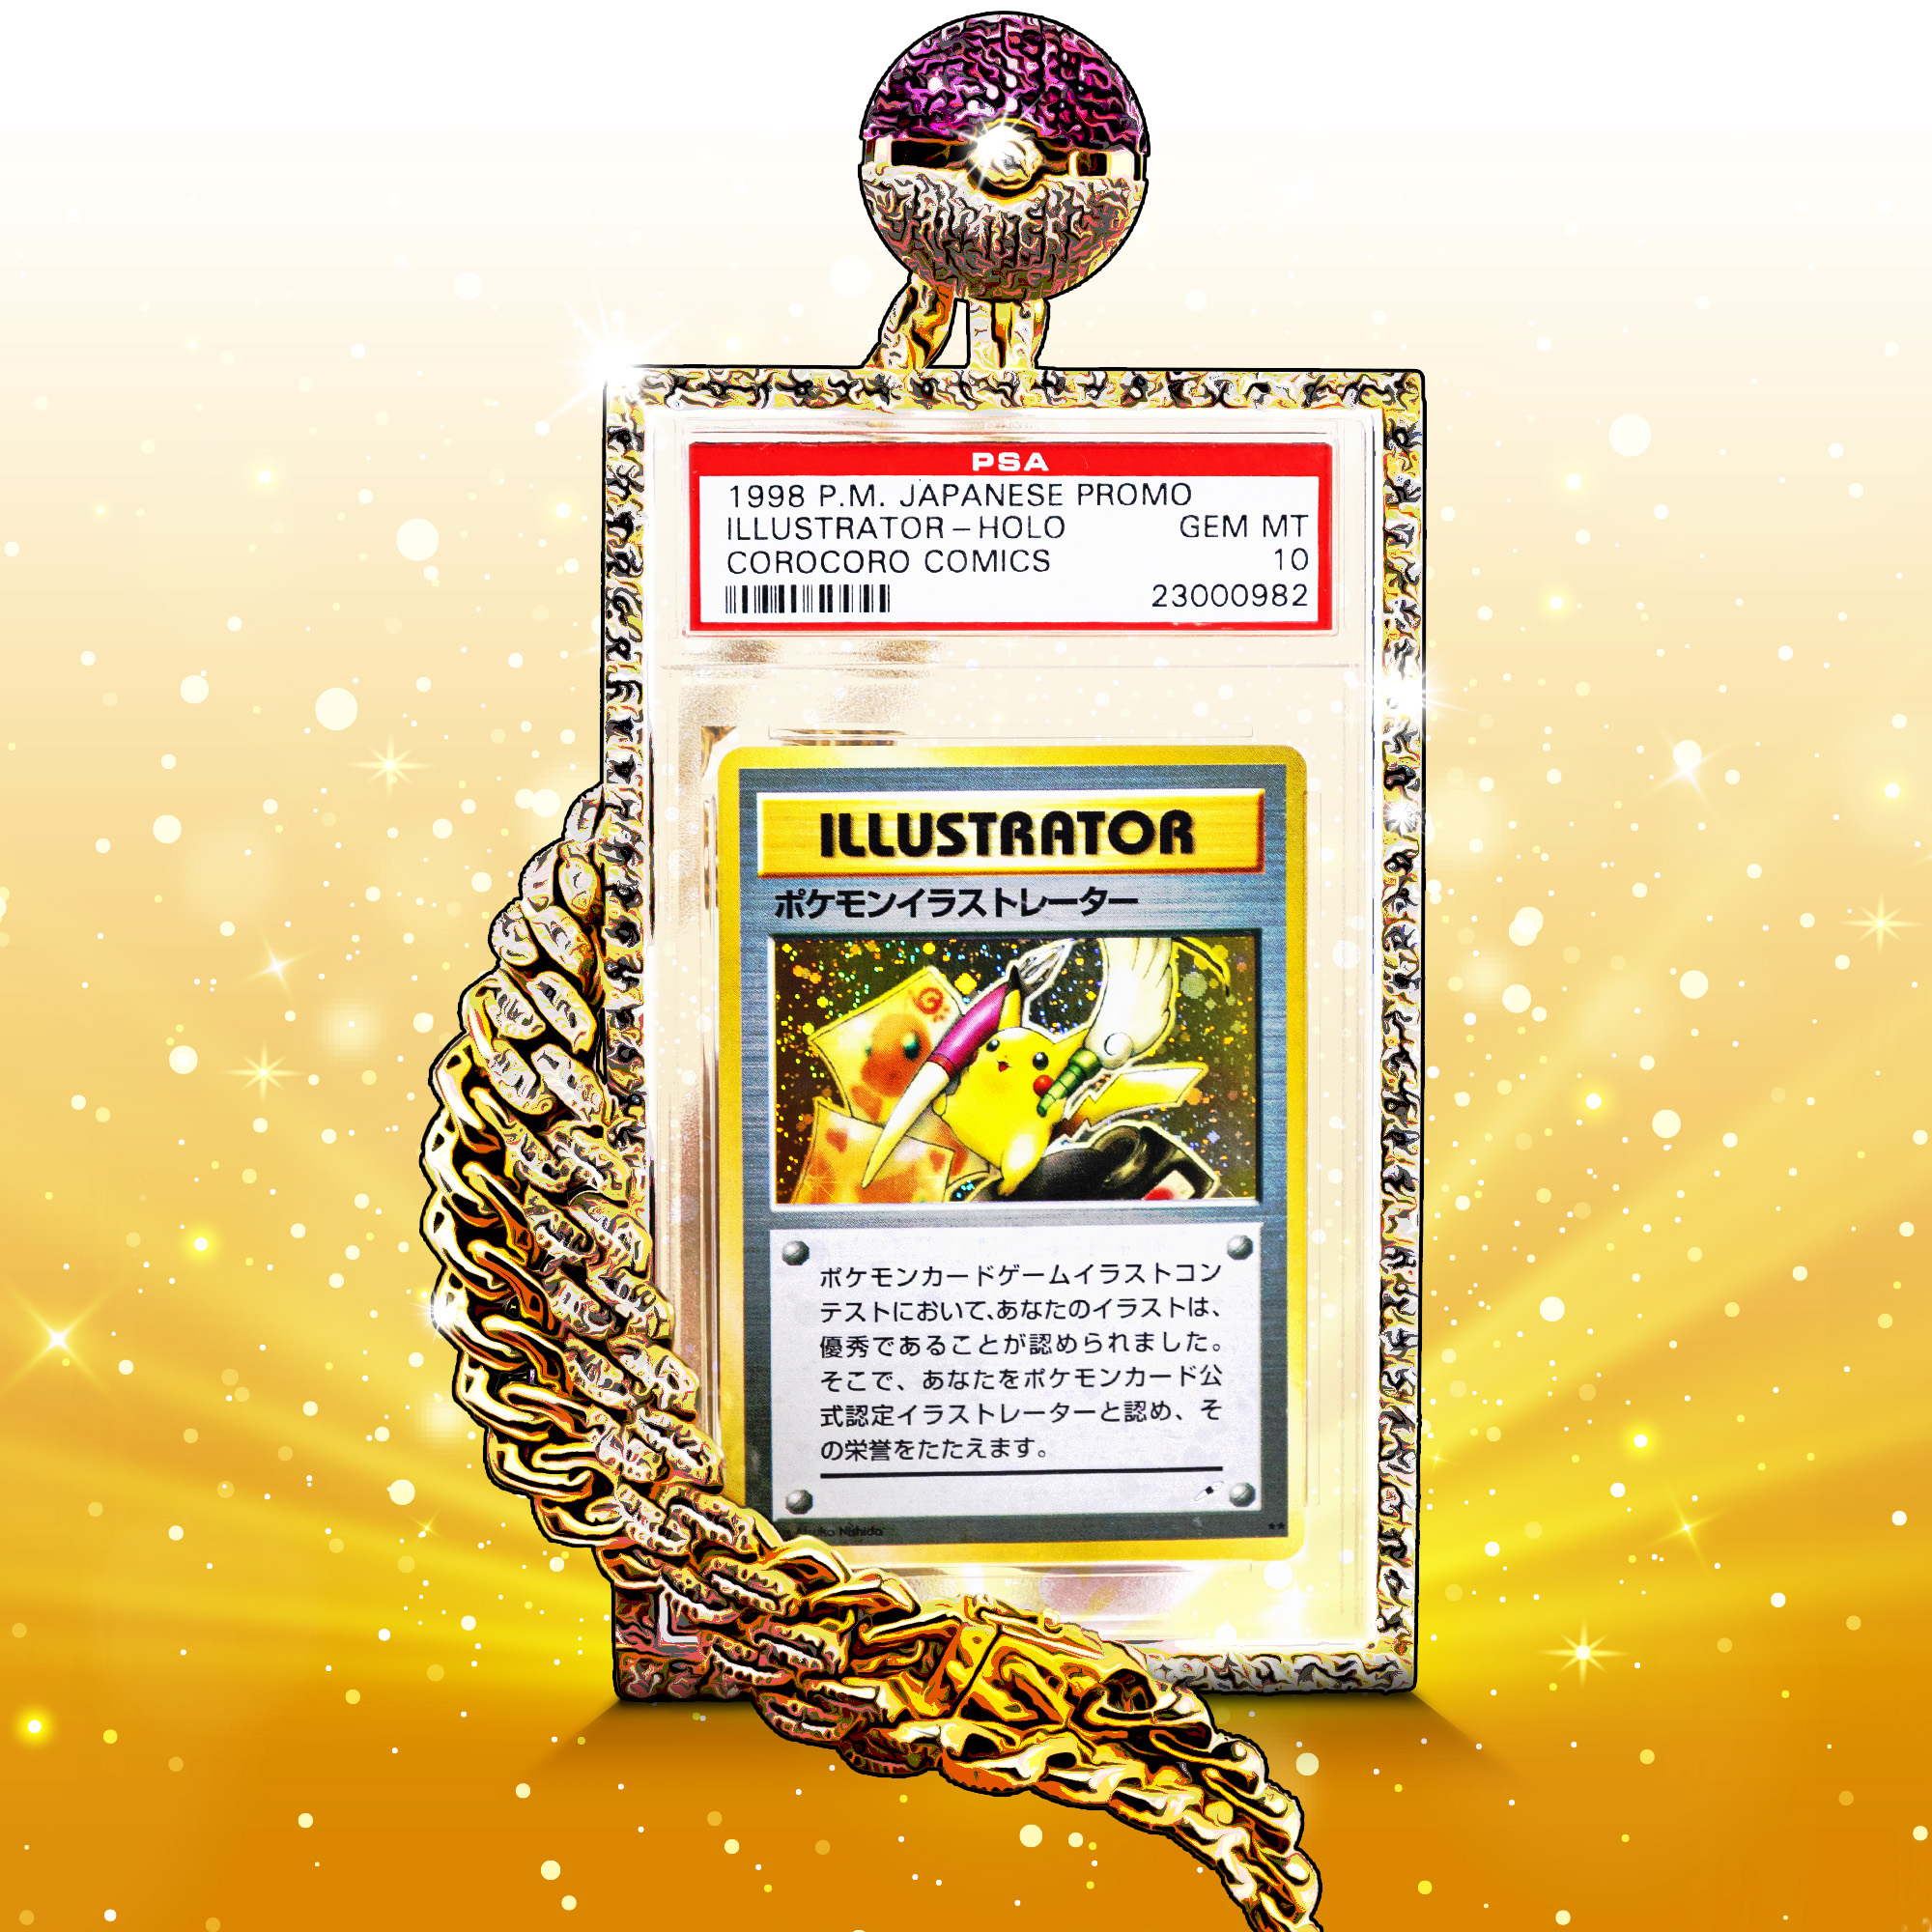 Top 10 Most Valuable Pokemon Cards - June 2021 Market Analysis 